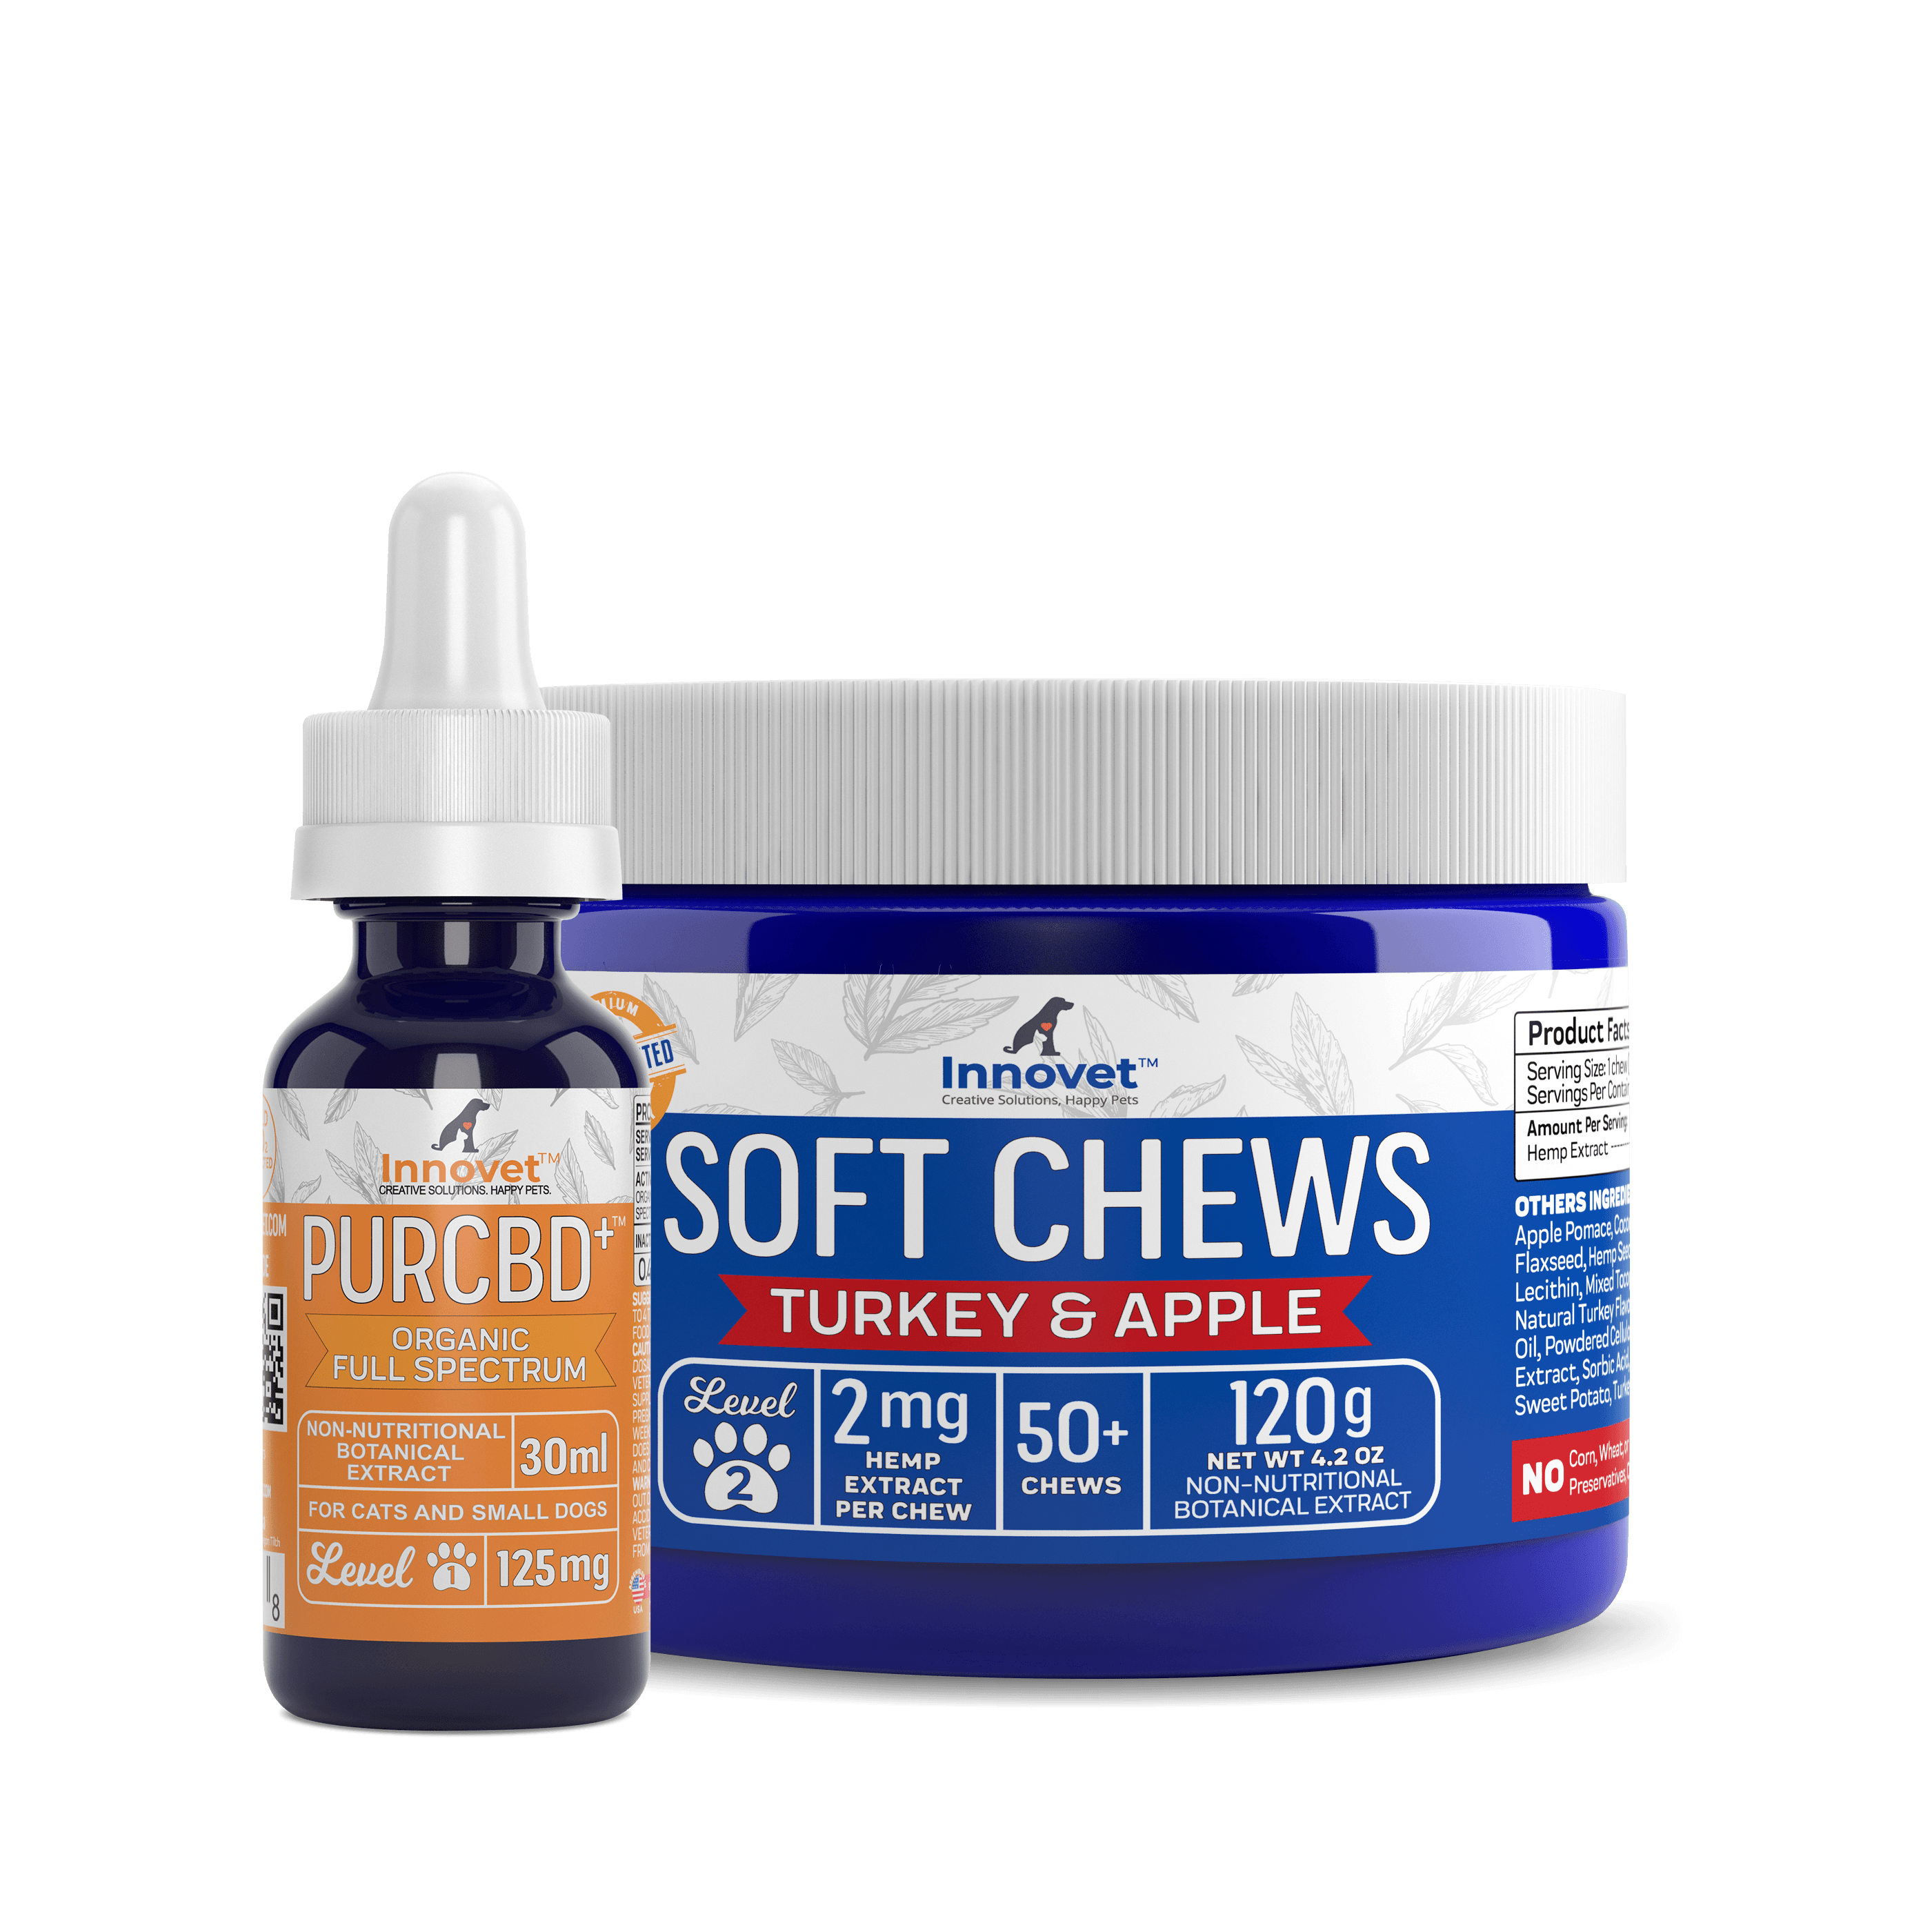 can cbd oil help dogs with allergy relief